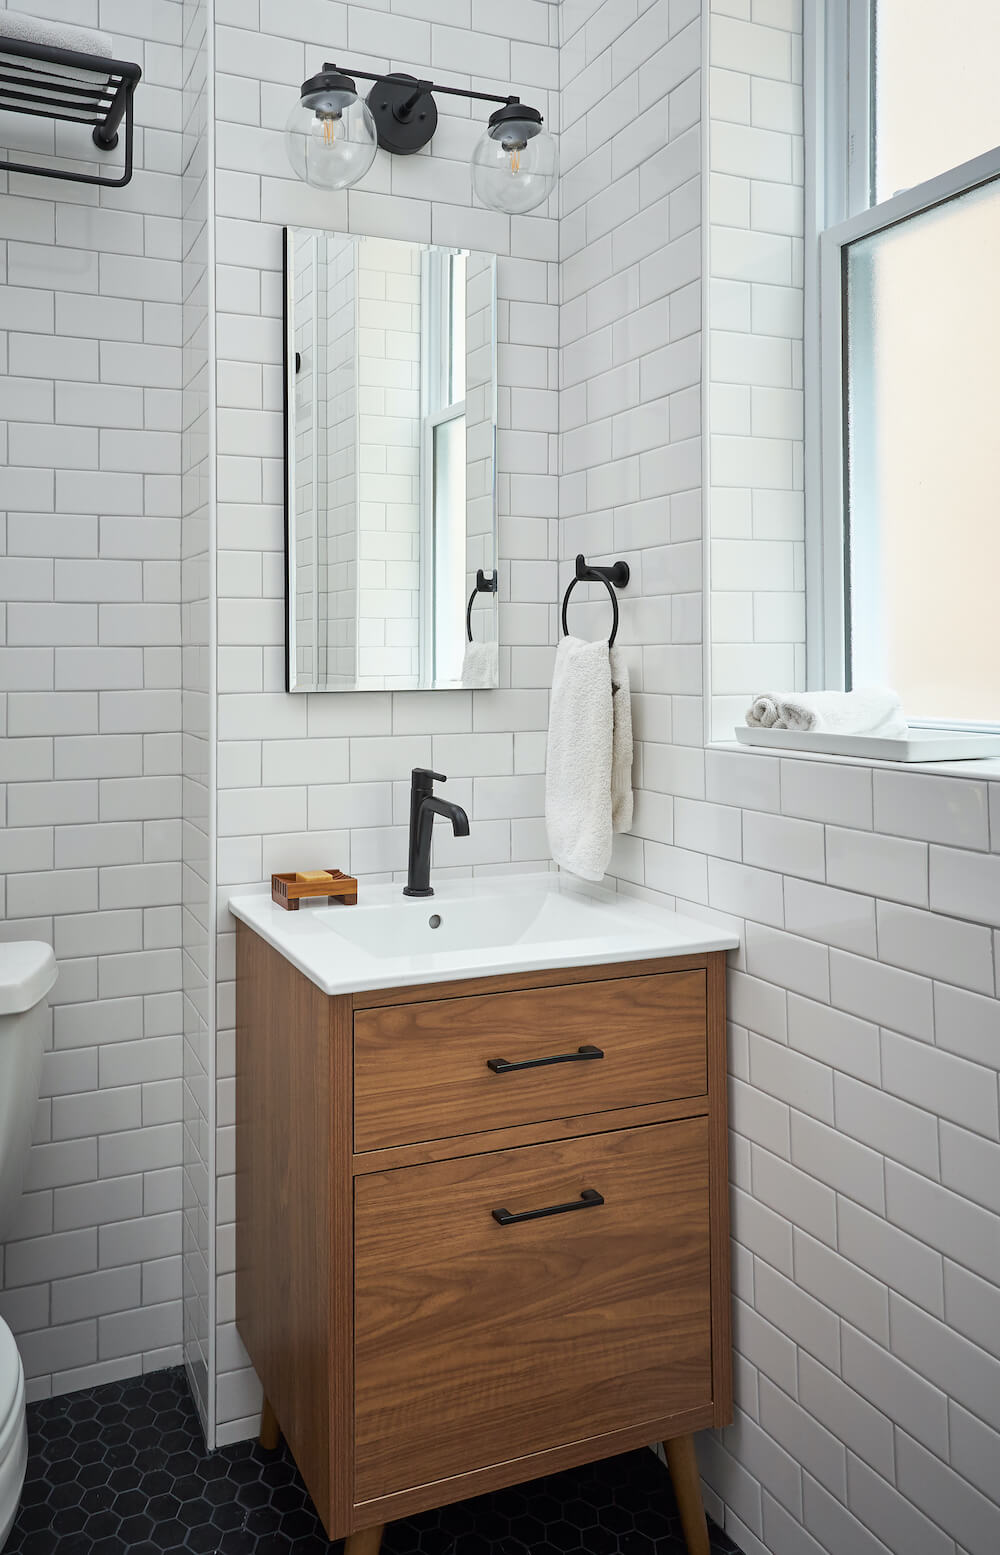 Bathroom with white subway tile and small wooden vanity